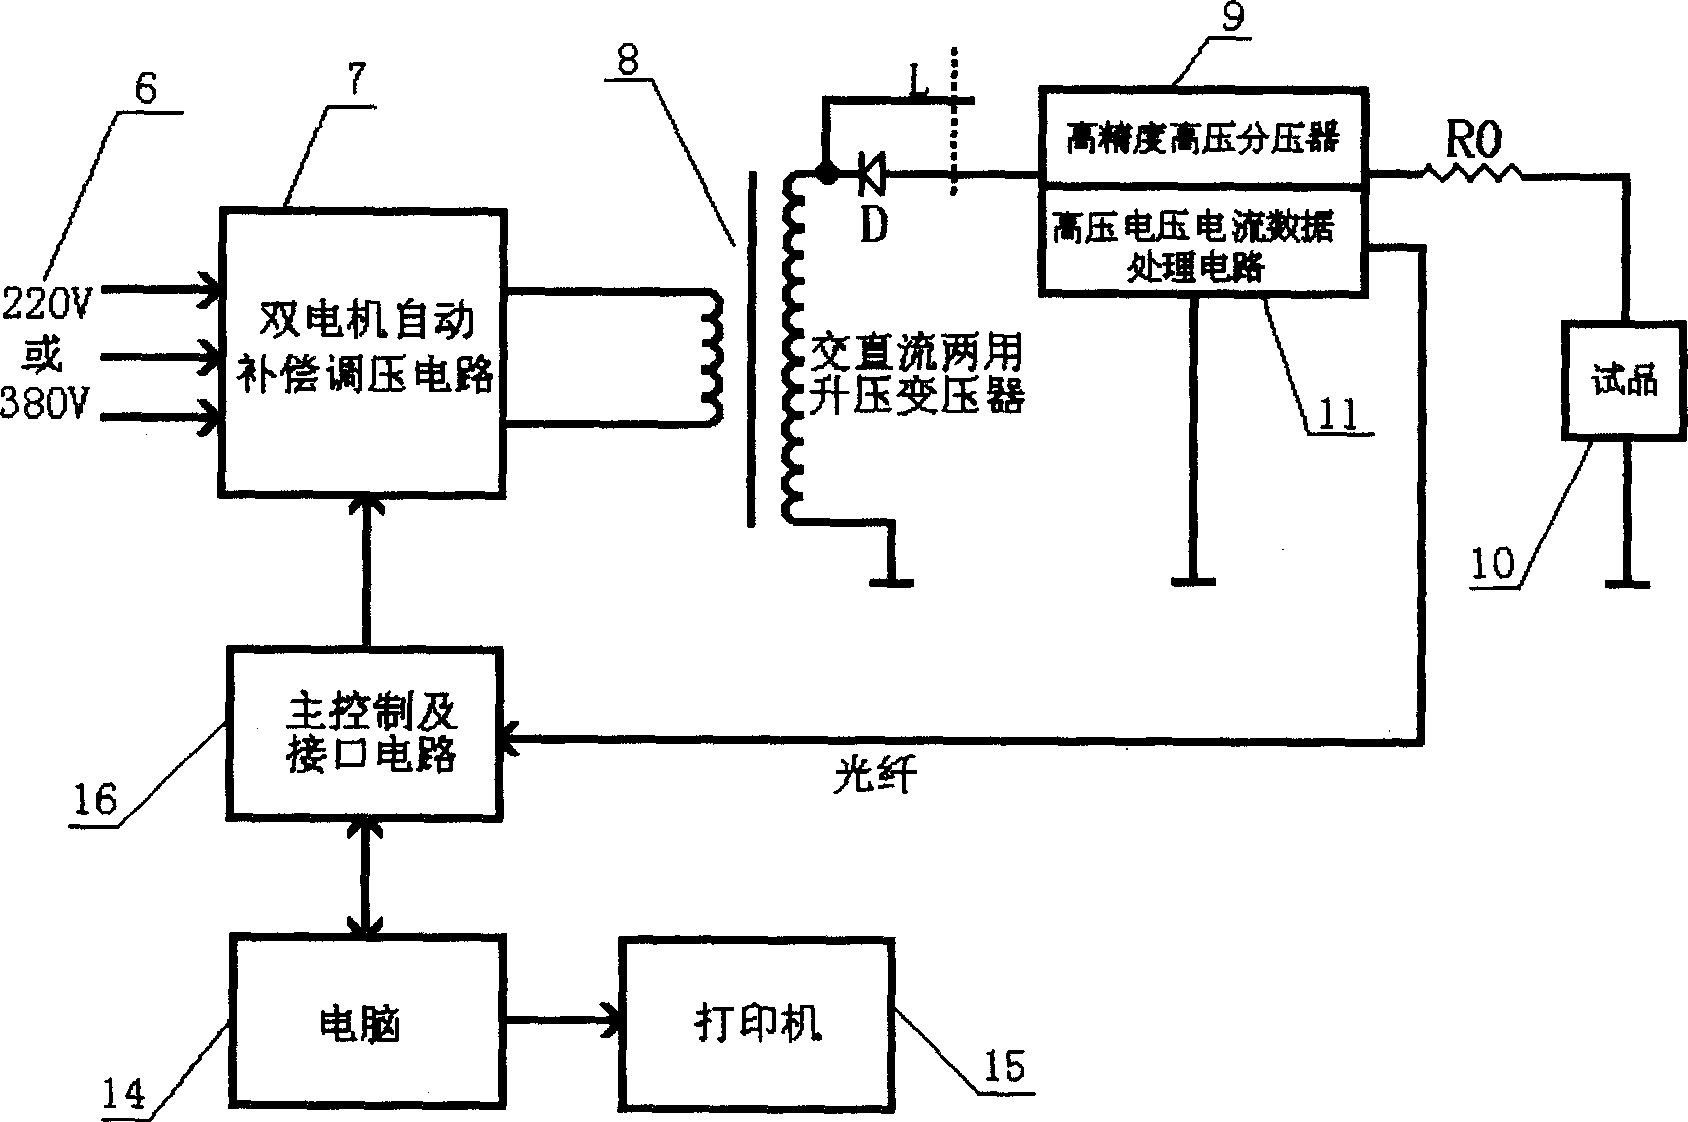 Intelligent AC-DC withstand voltage test apparatus